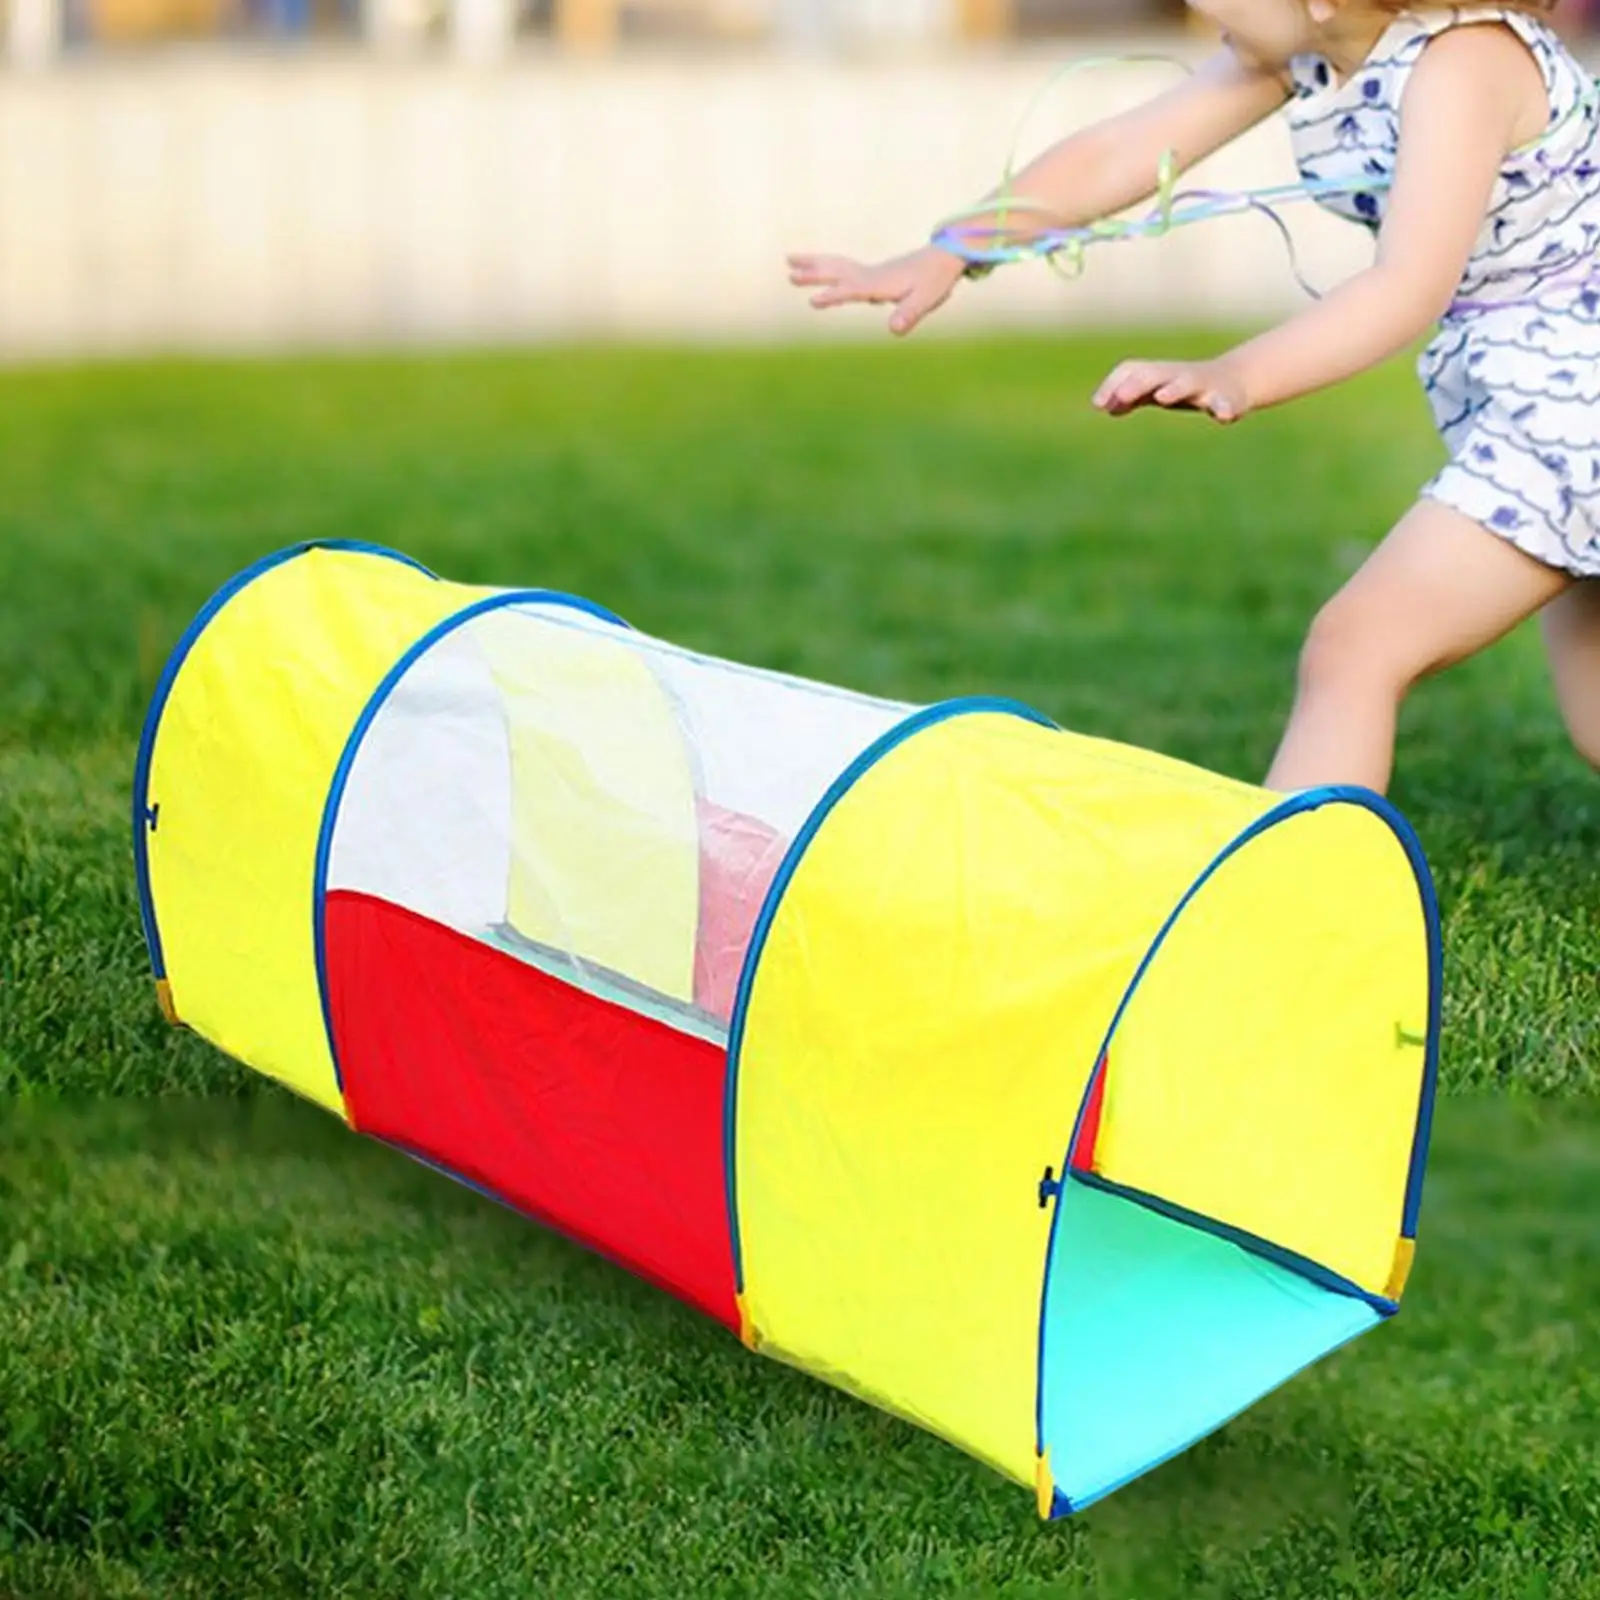 Kids Play Tunnel Tent Indoor Outdoor Toy for Toddlers Children Infants